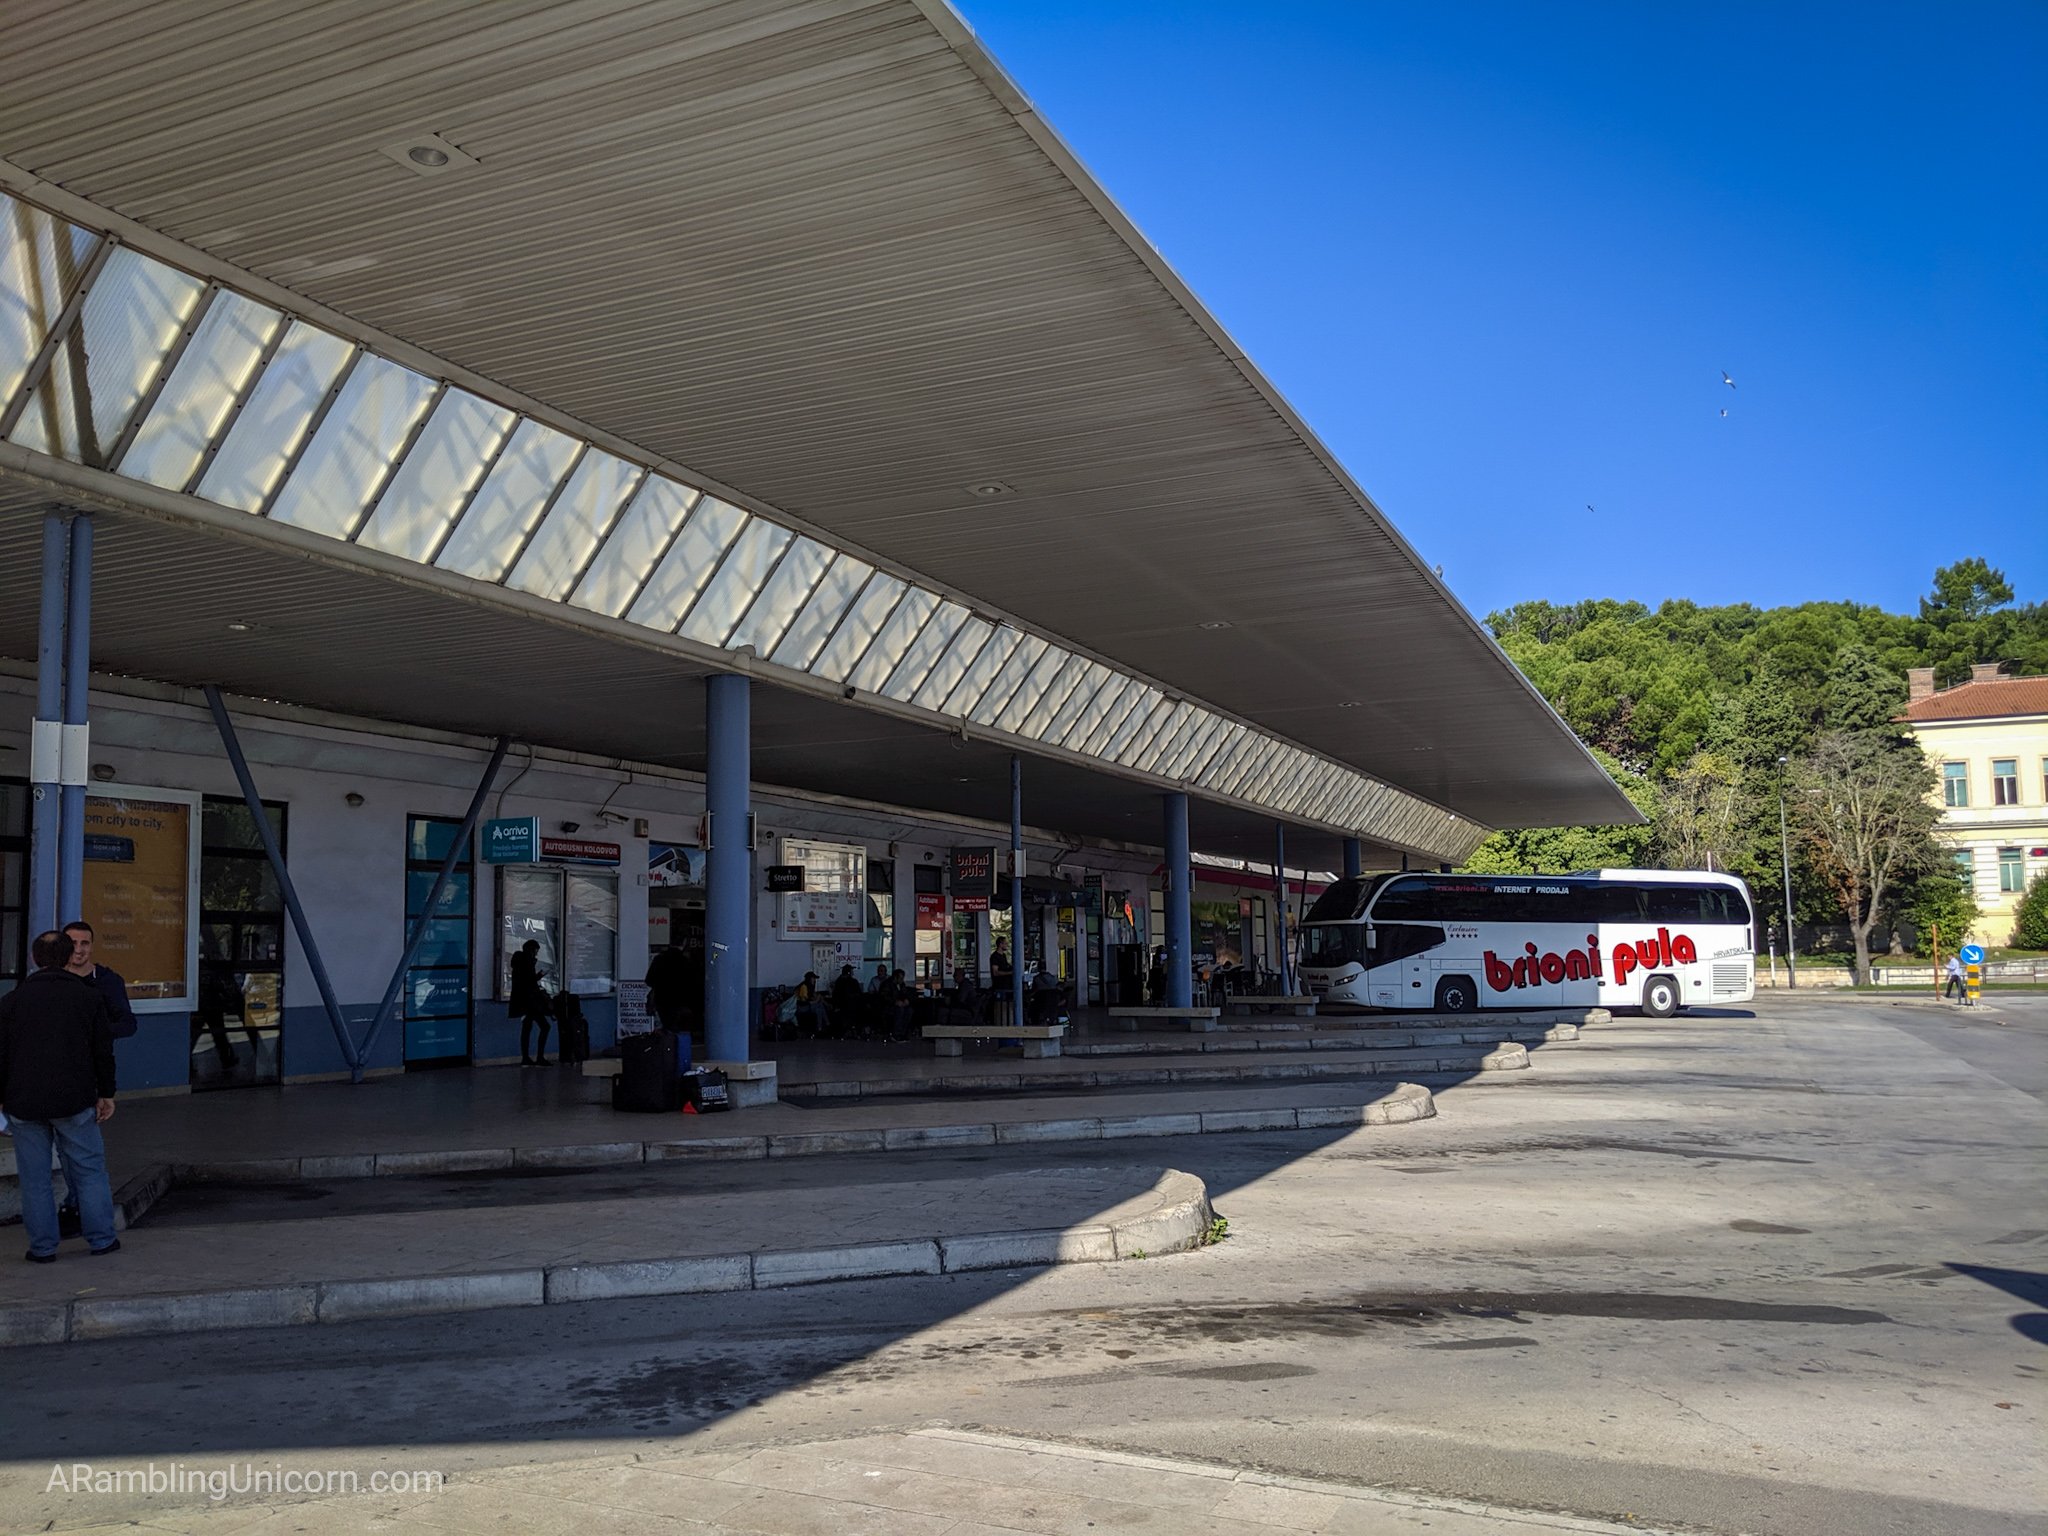 The Pula bus station with some bus parking spots.